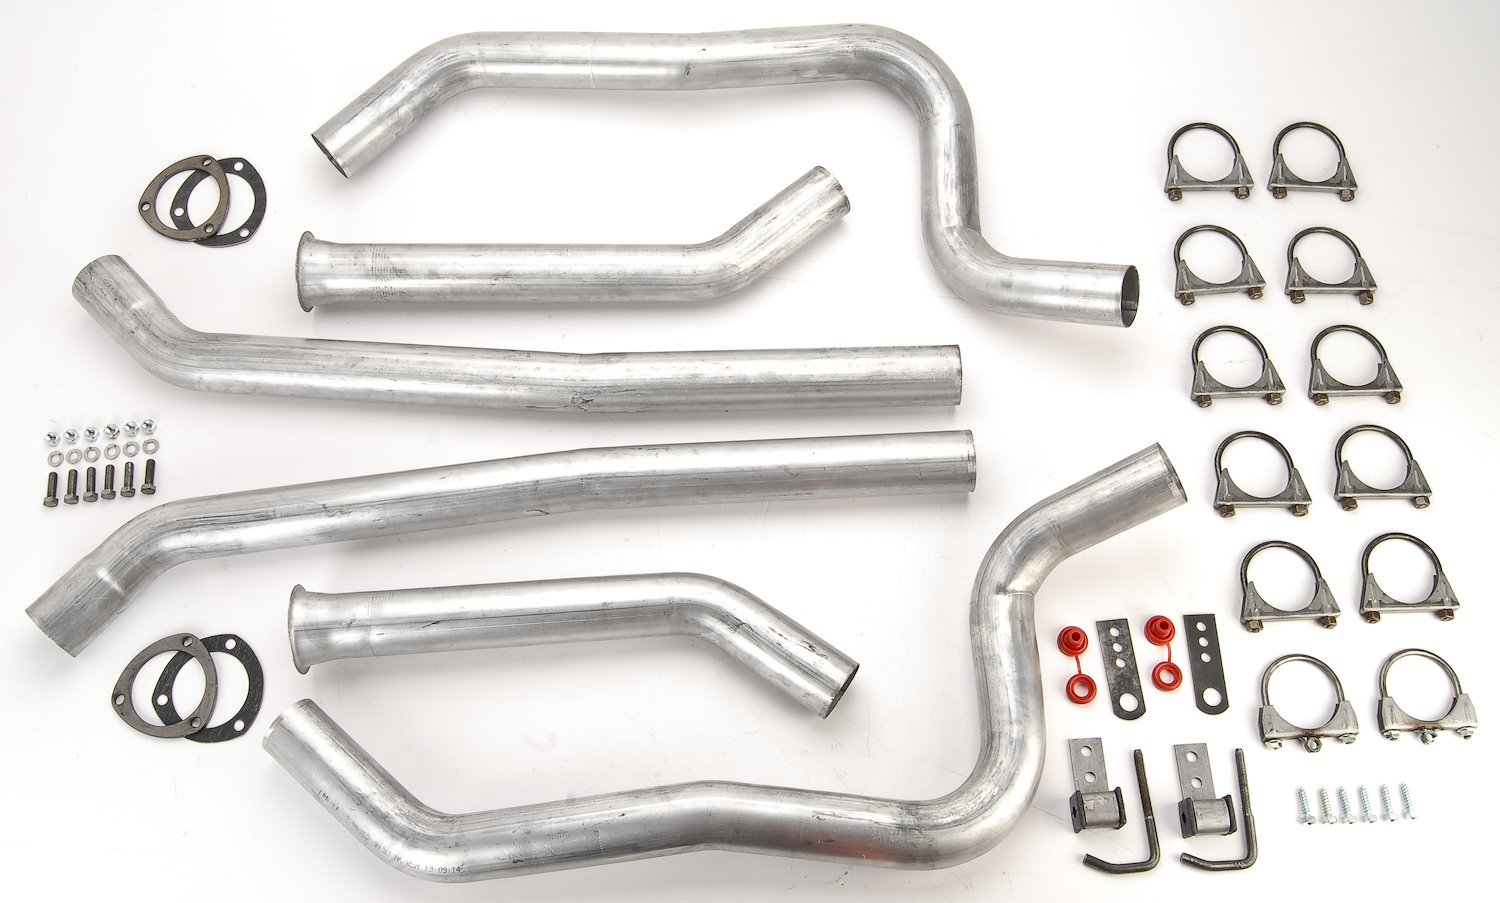 30528 - Header-Back Dual Exhaust Kit for GM F-Body, X-Body [2-1/2 in.]